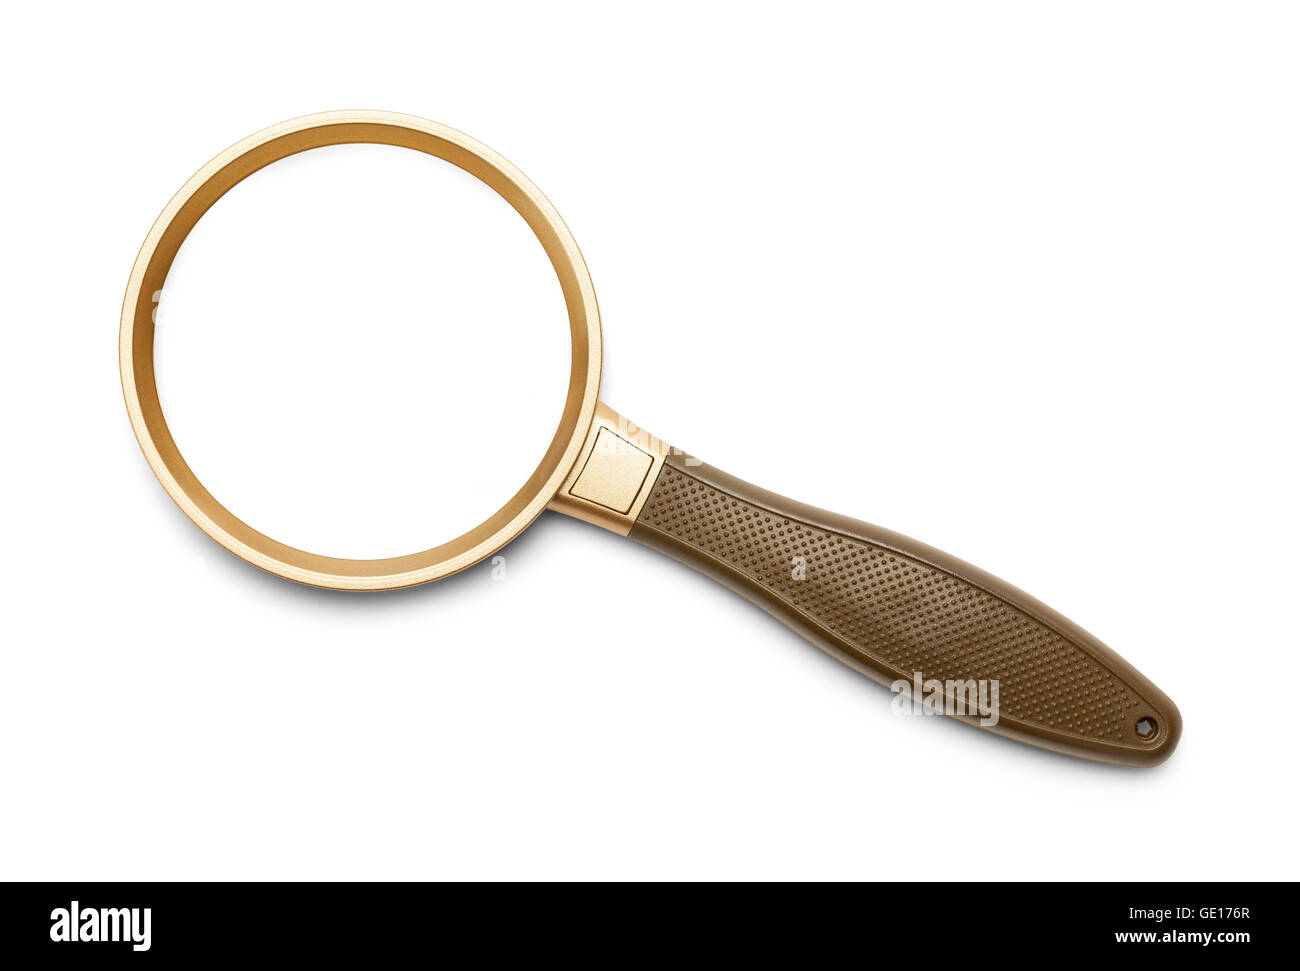 Gold and Brown Magnifying Glass Isolated on White Background. Stock Photo